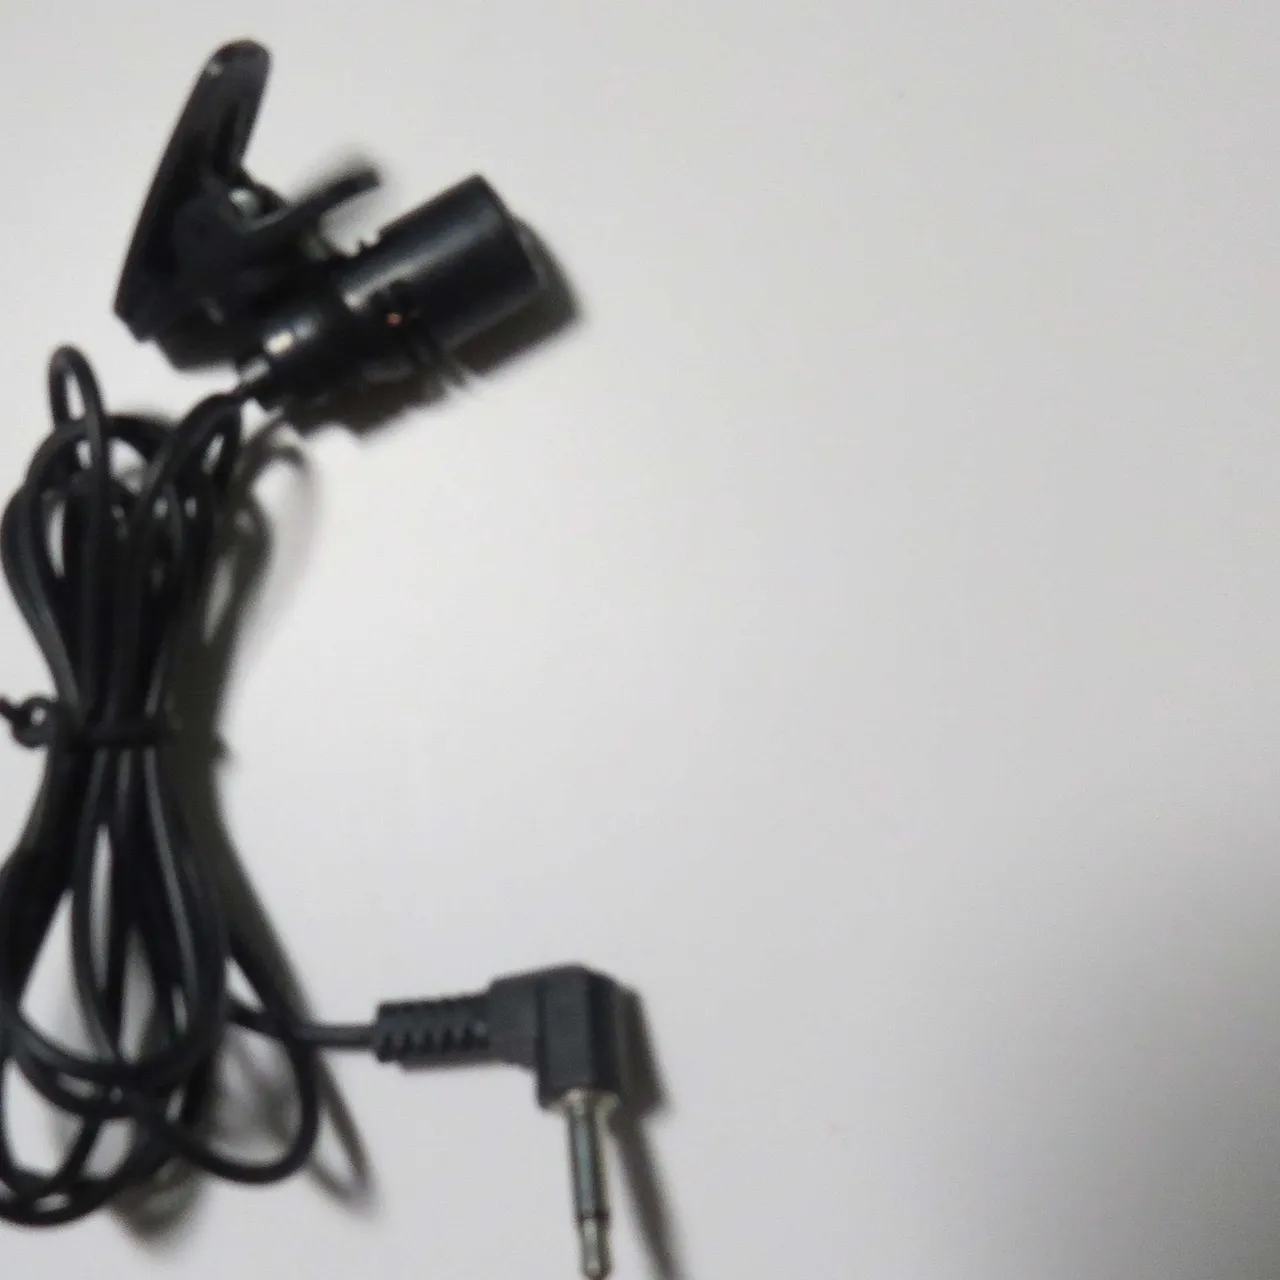 Small Mic for phone or computer photo 1